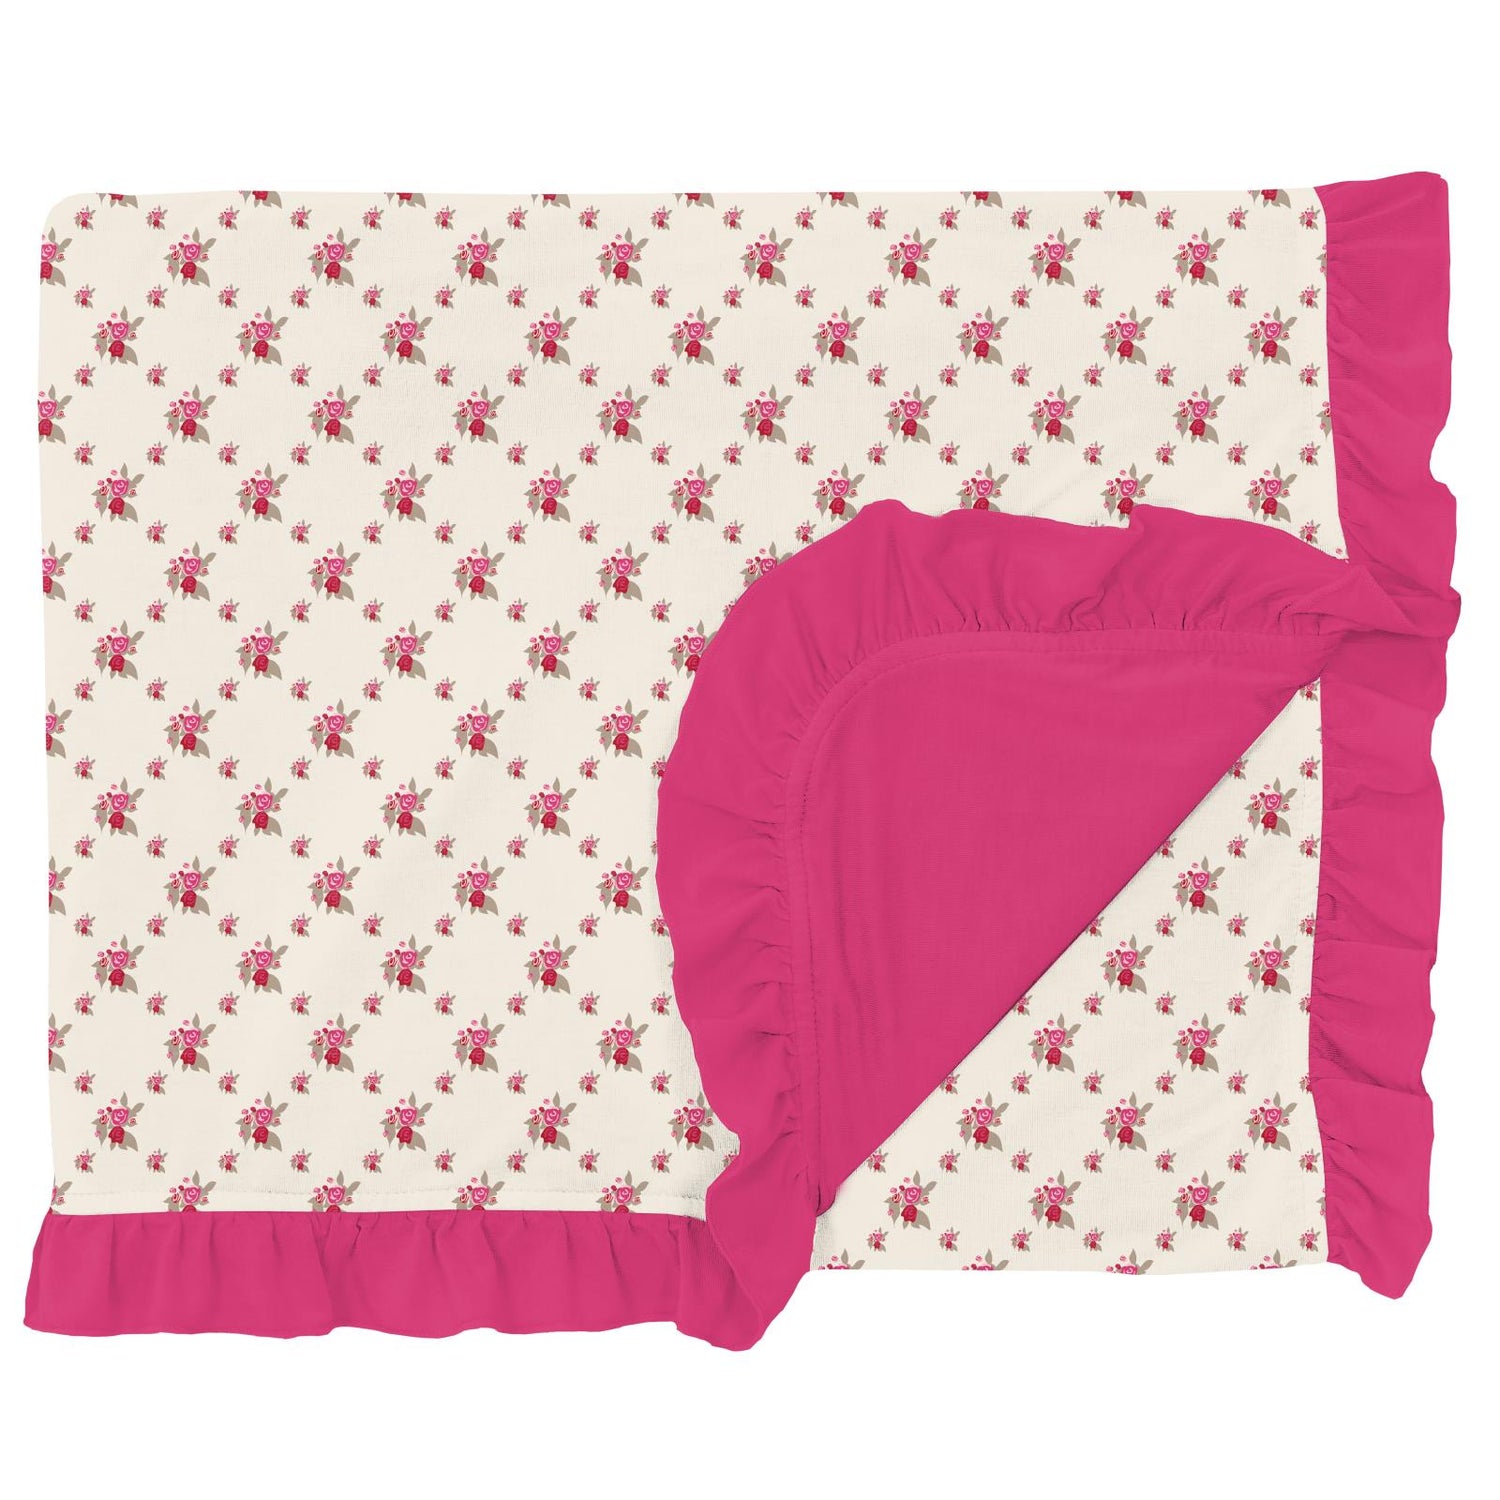 Print Ruffle Double Layer Throw Blanket in Natural Rose Trellis